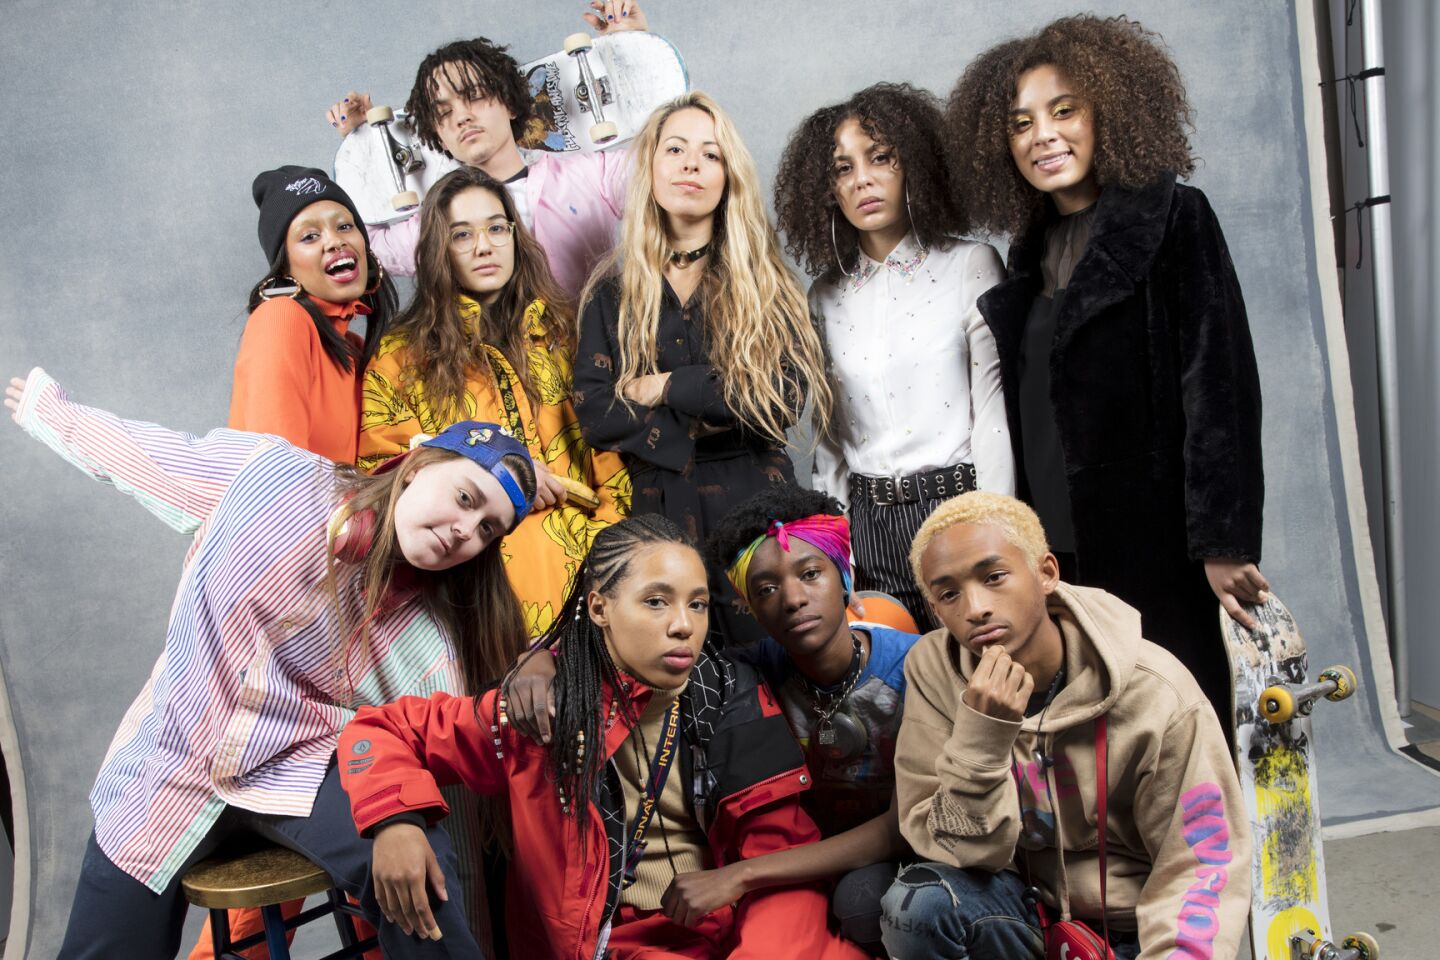 Nina Moran, Ajani Russel, Rachelle Vinberg, Alex Cooper, Dede Lovelave, director Crystal Moselle, Kabrina Adams, actor Jaden Smith, Brenn Lorenzo, and Jules Lorenzo, from the film "Skate Kitchen," photographed in the L.A. Times Studio at Chase Sapphire on Main, during the Sundance Film Festival in Park City, Utah, Jan. 21, 2018.